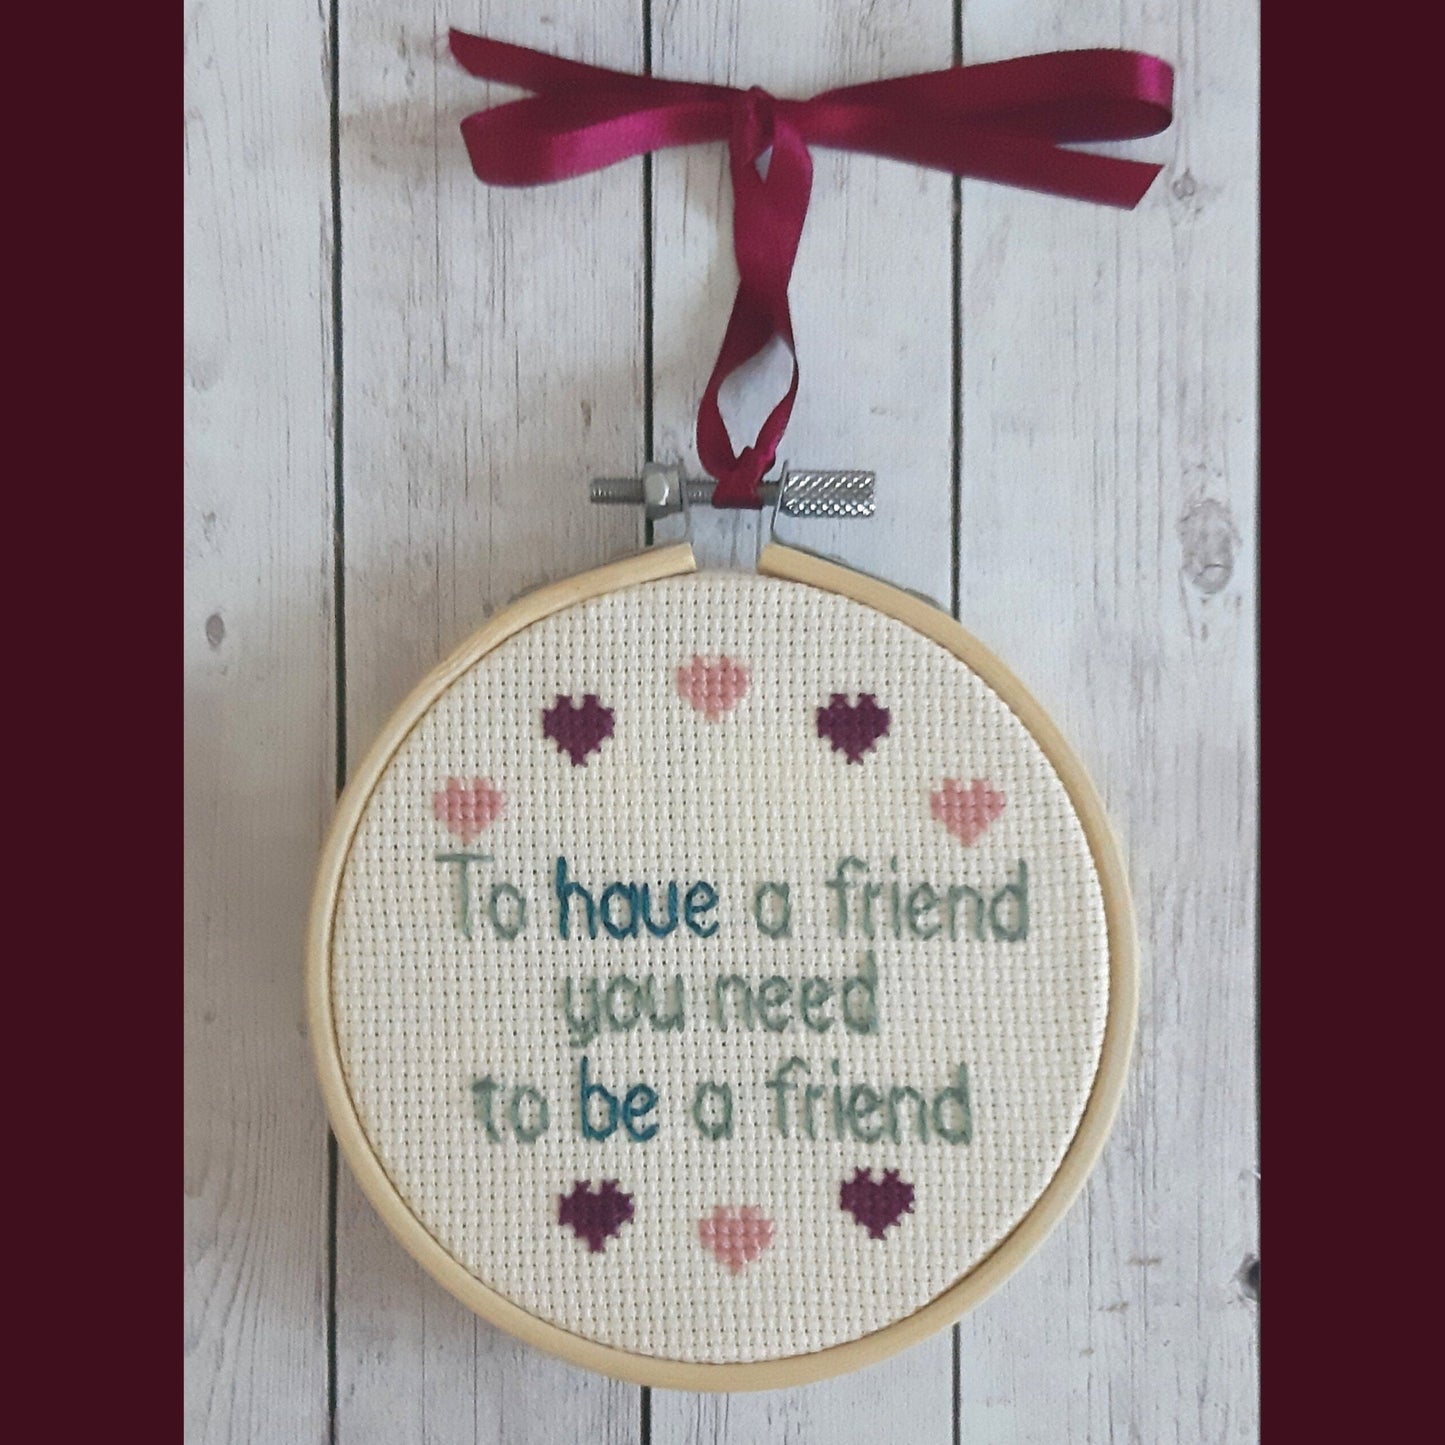 To have a friend you need to be a friend, completed cross stitch quote - Thistleflat Crafts